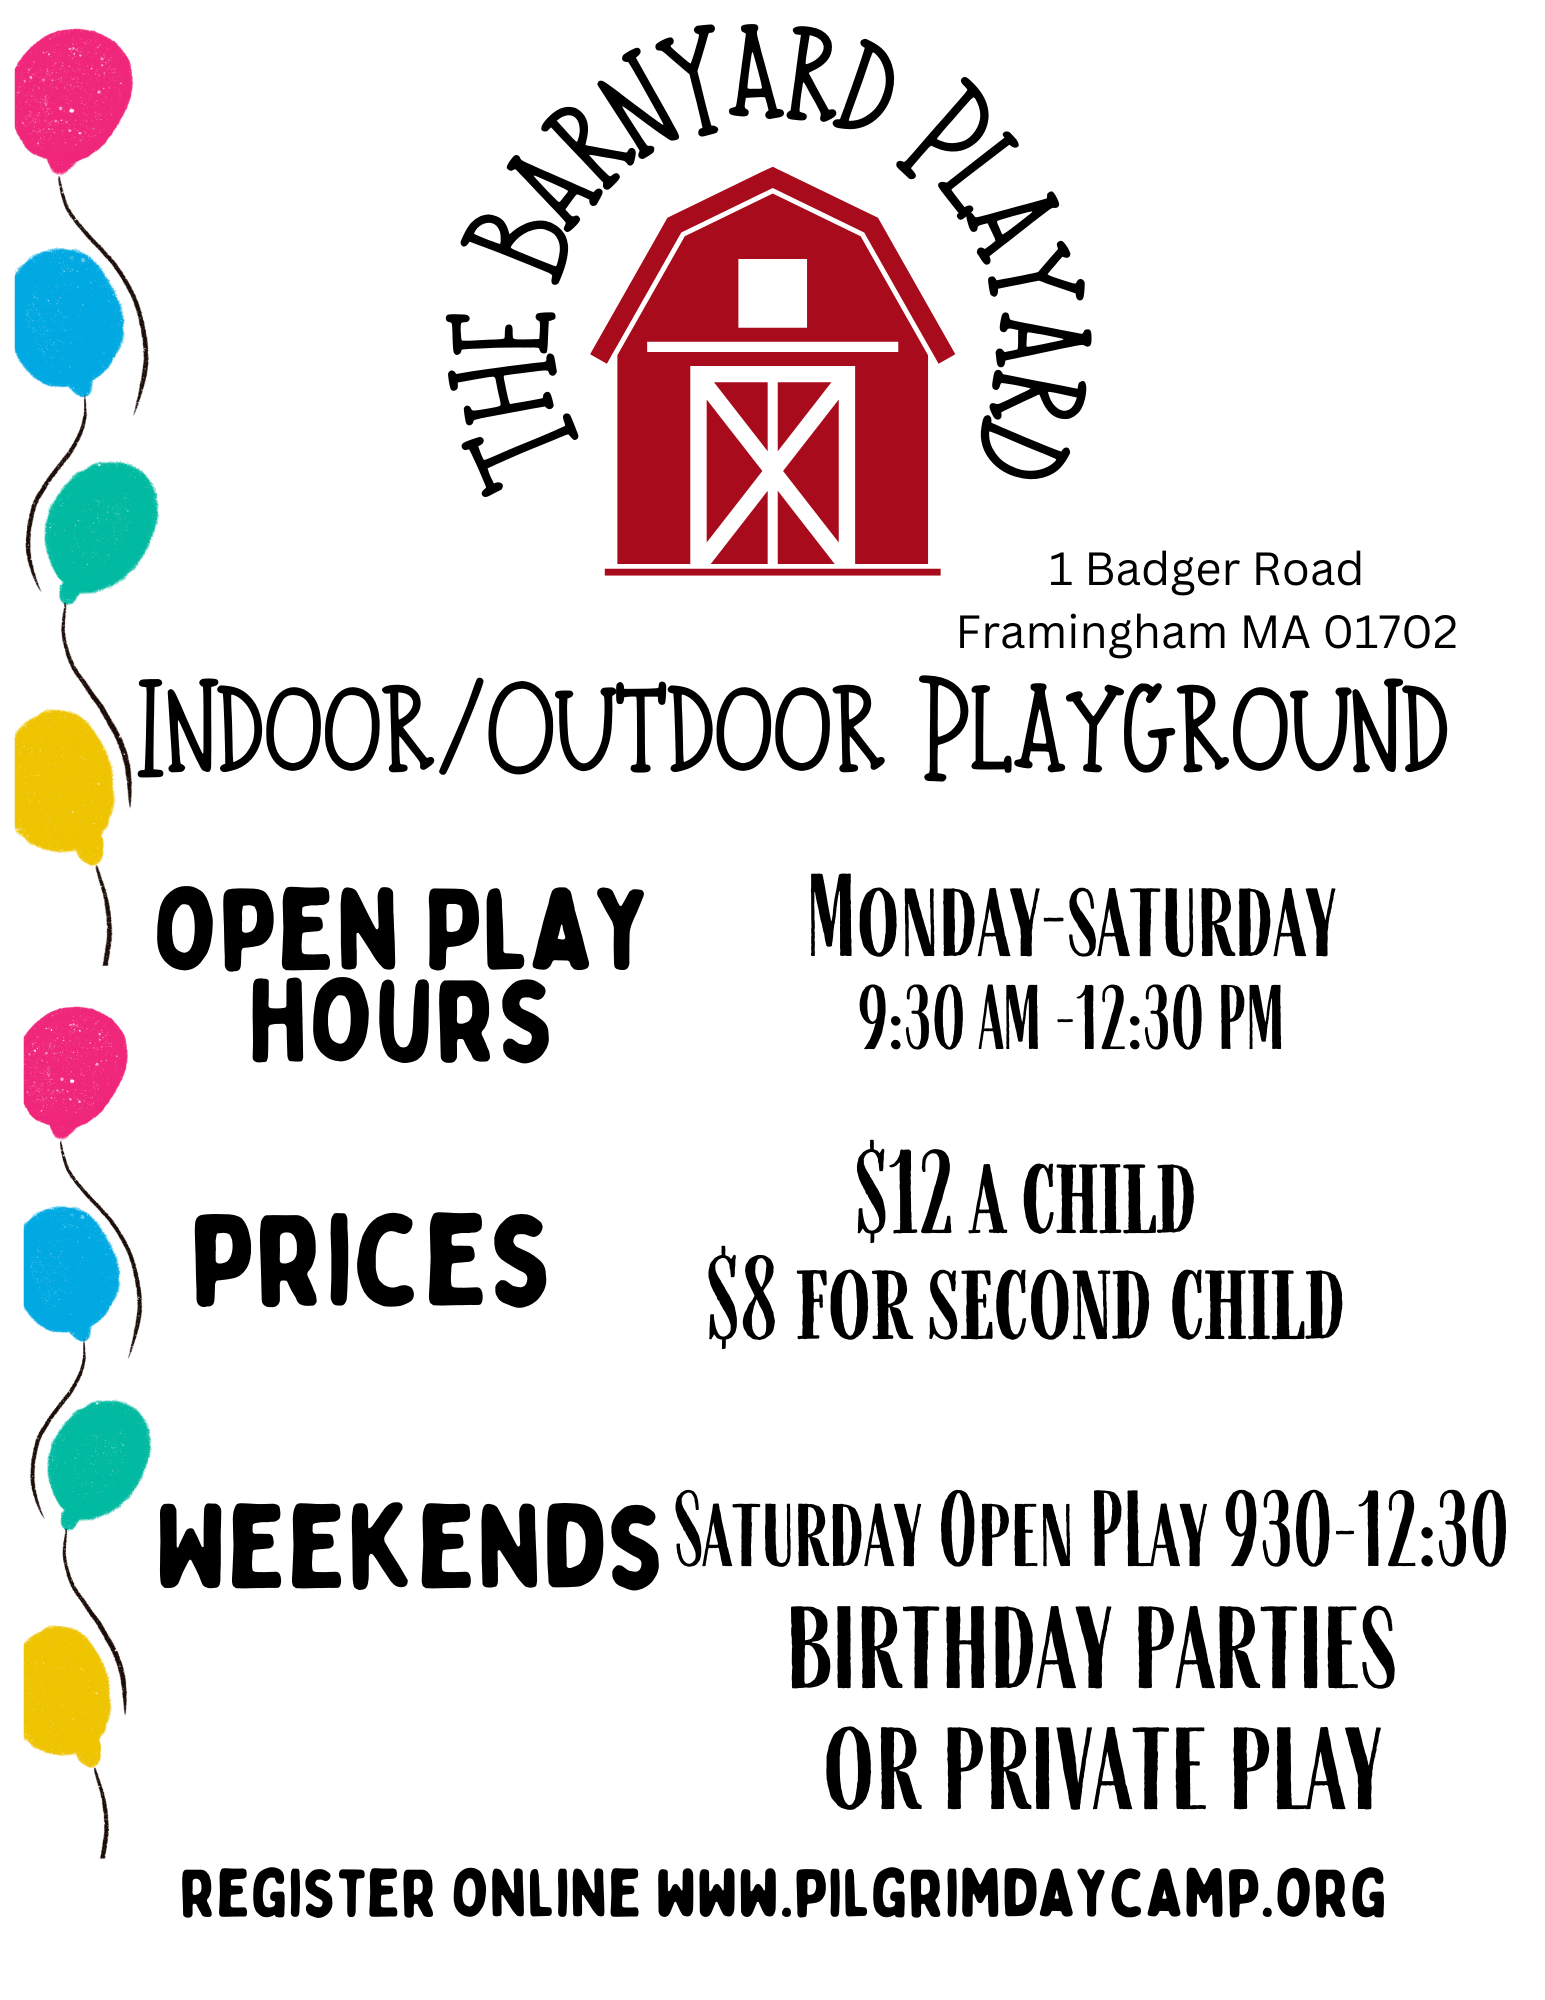 The Barnyard Playard is open Monday-Saturday 9:30-12:30. We also host birthday parties on the weekend!